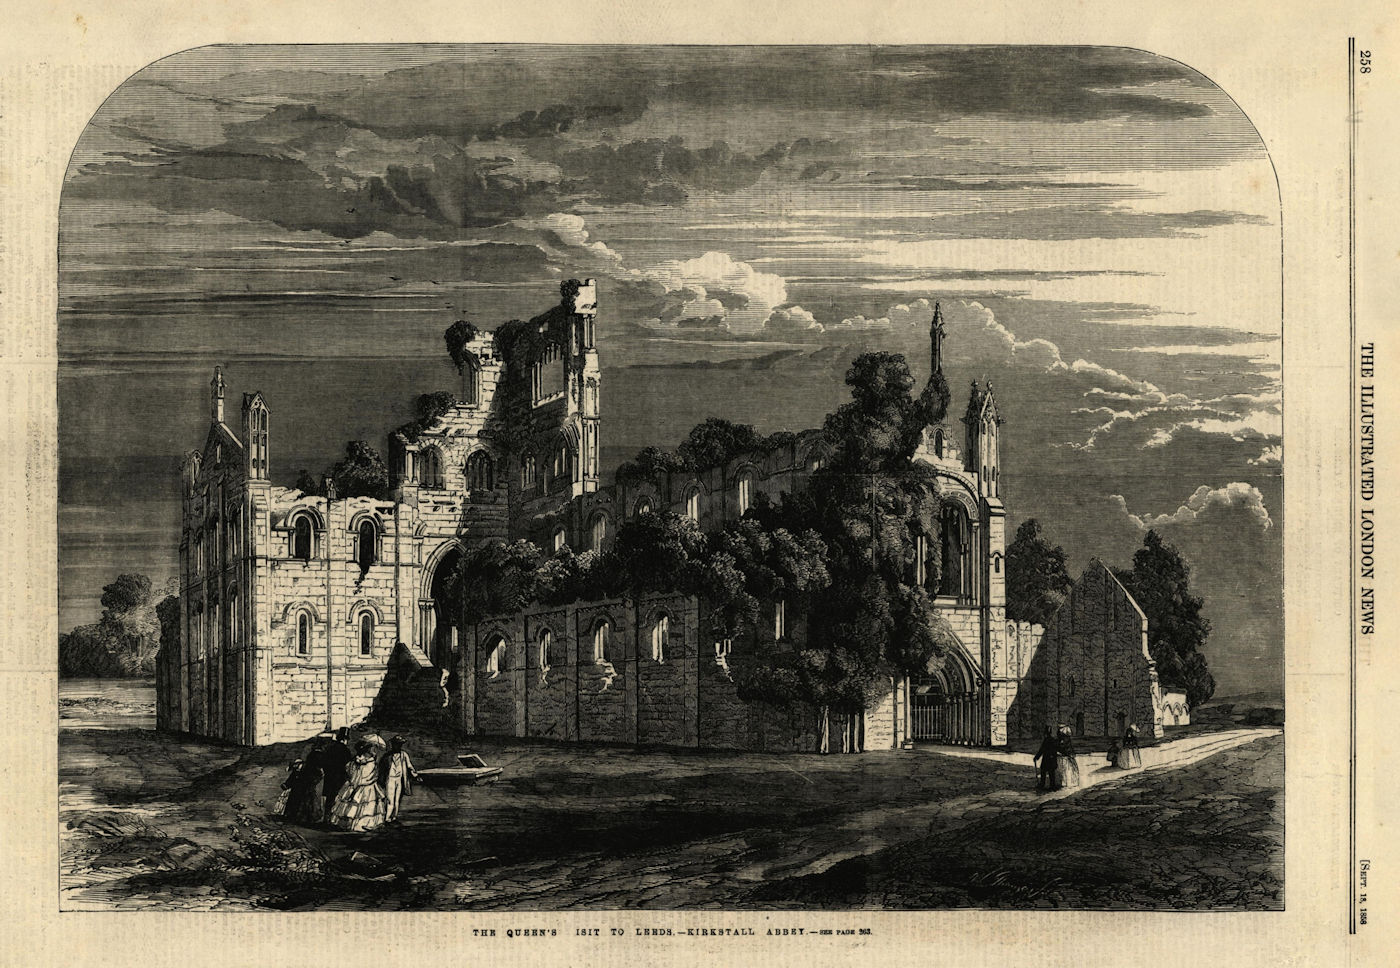 Associate Product Queen Victoria's visit to Leeds - Kirkstall Abbey. Yorkshire. Churches 1858